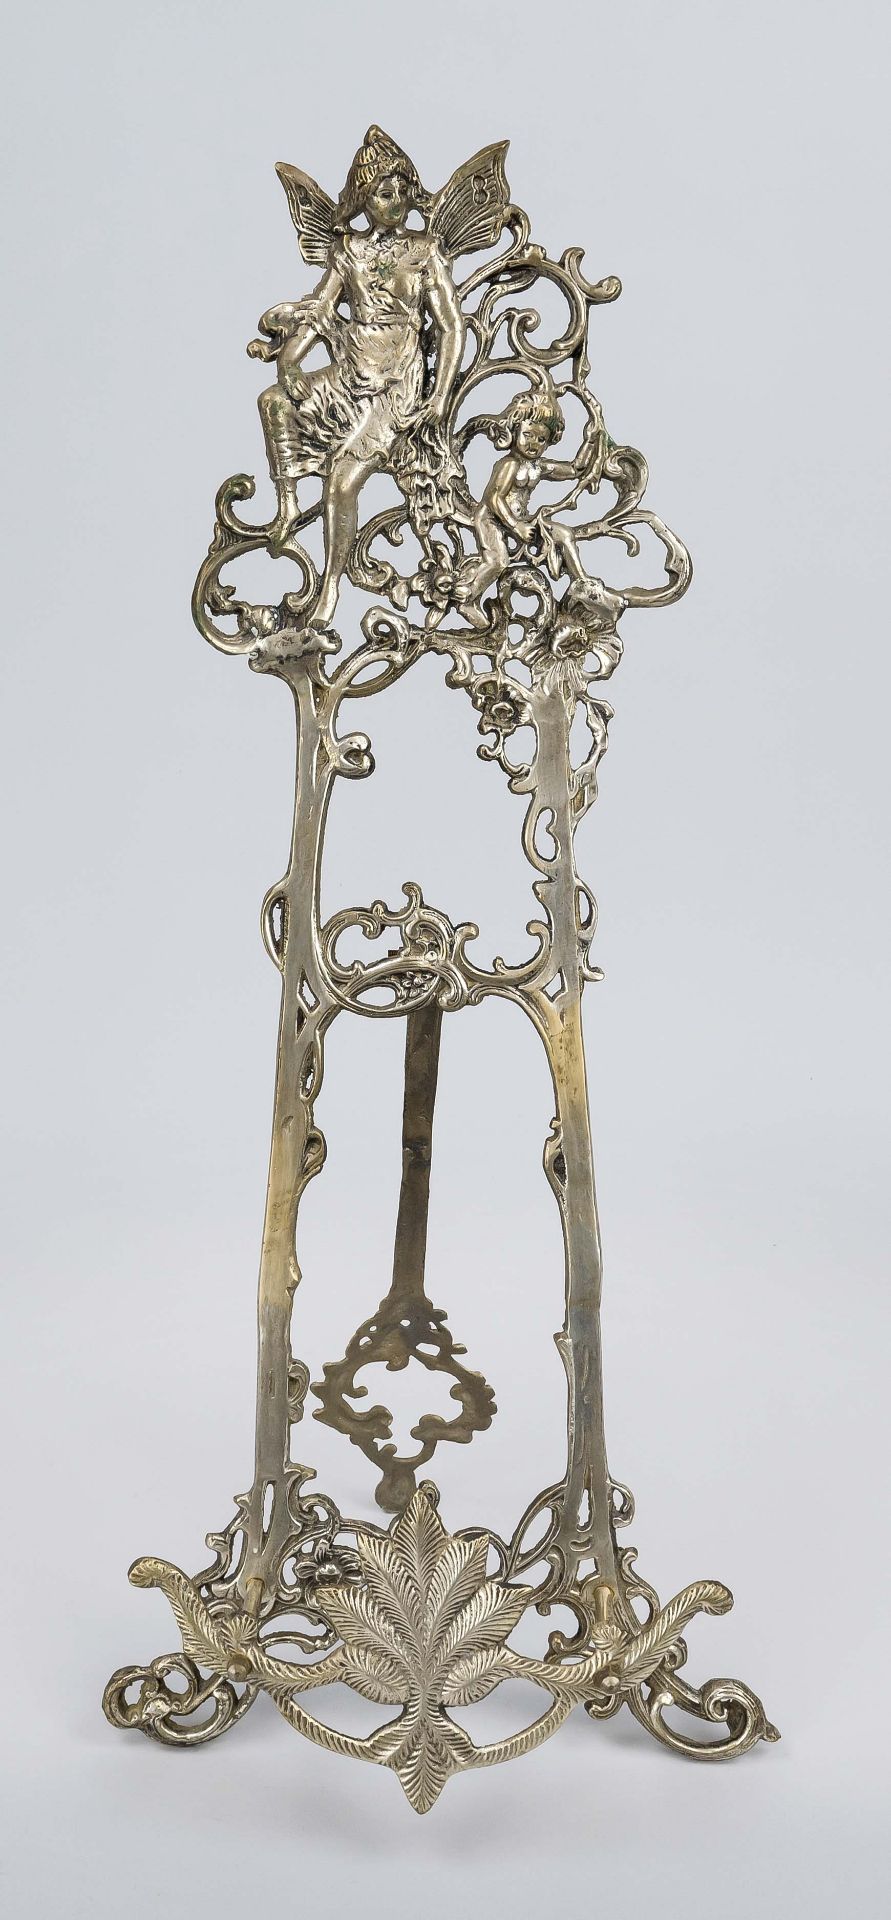 Small easel in historicist style, 20th century, nickel-plated brass, relief in typical style, h.